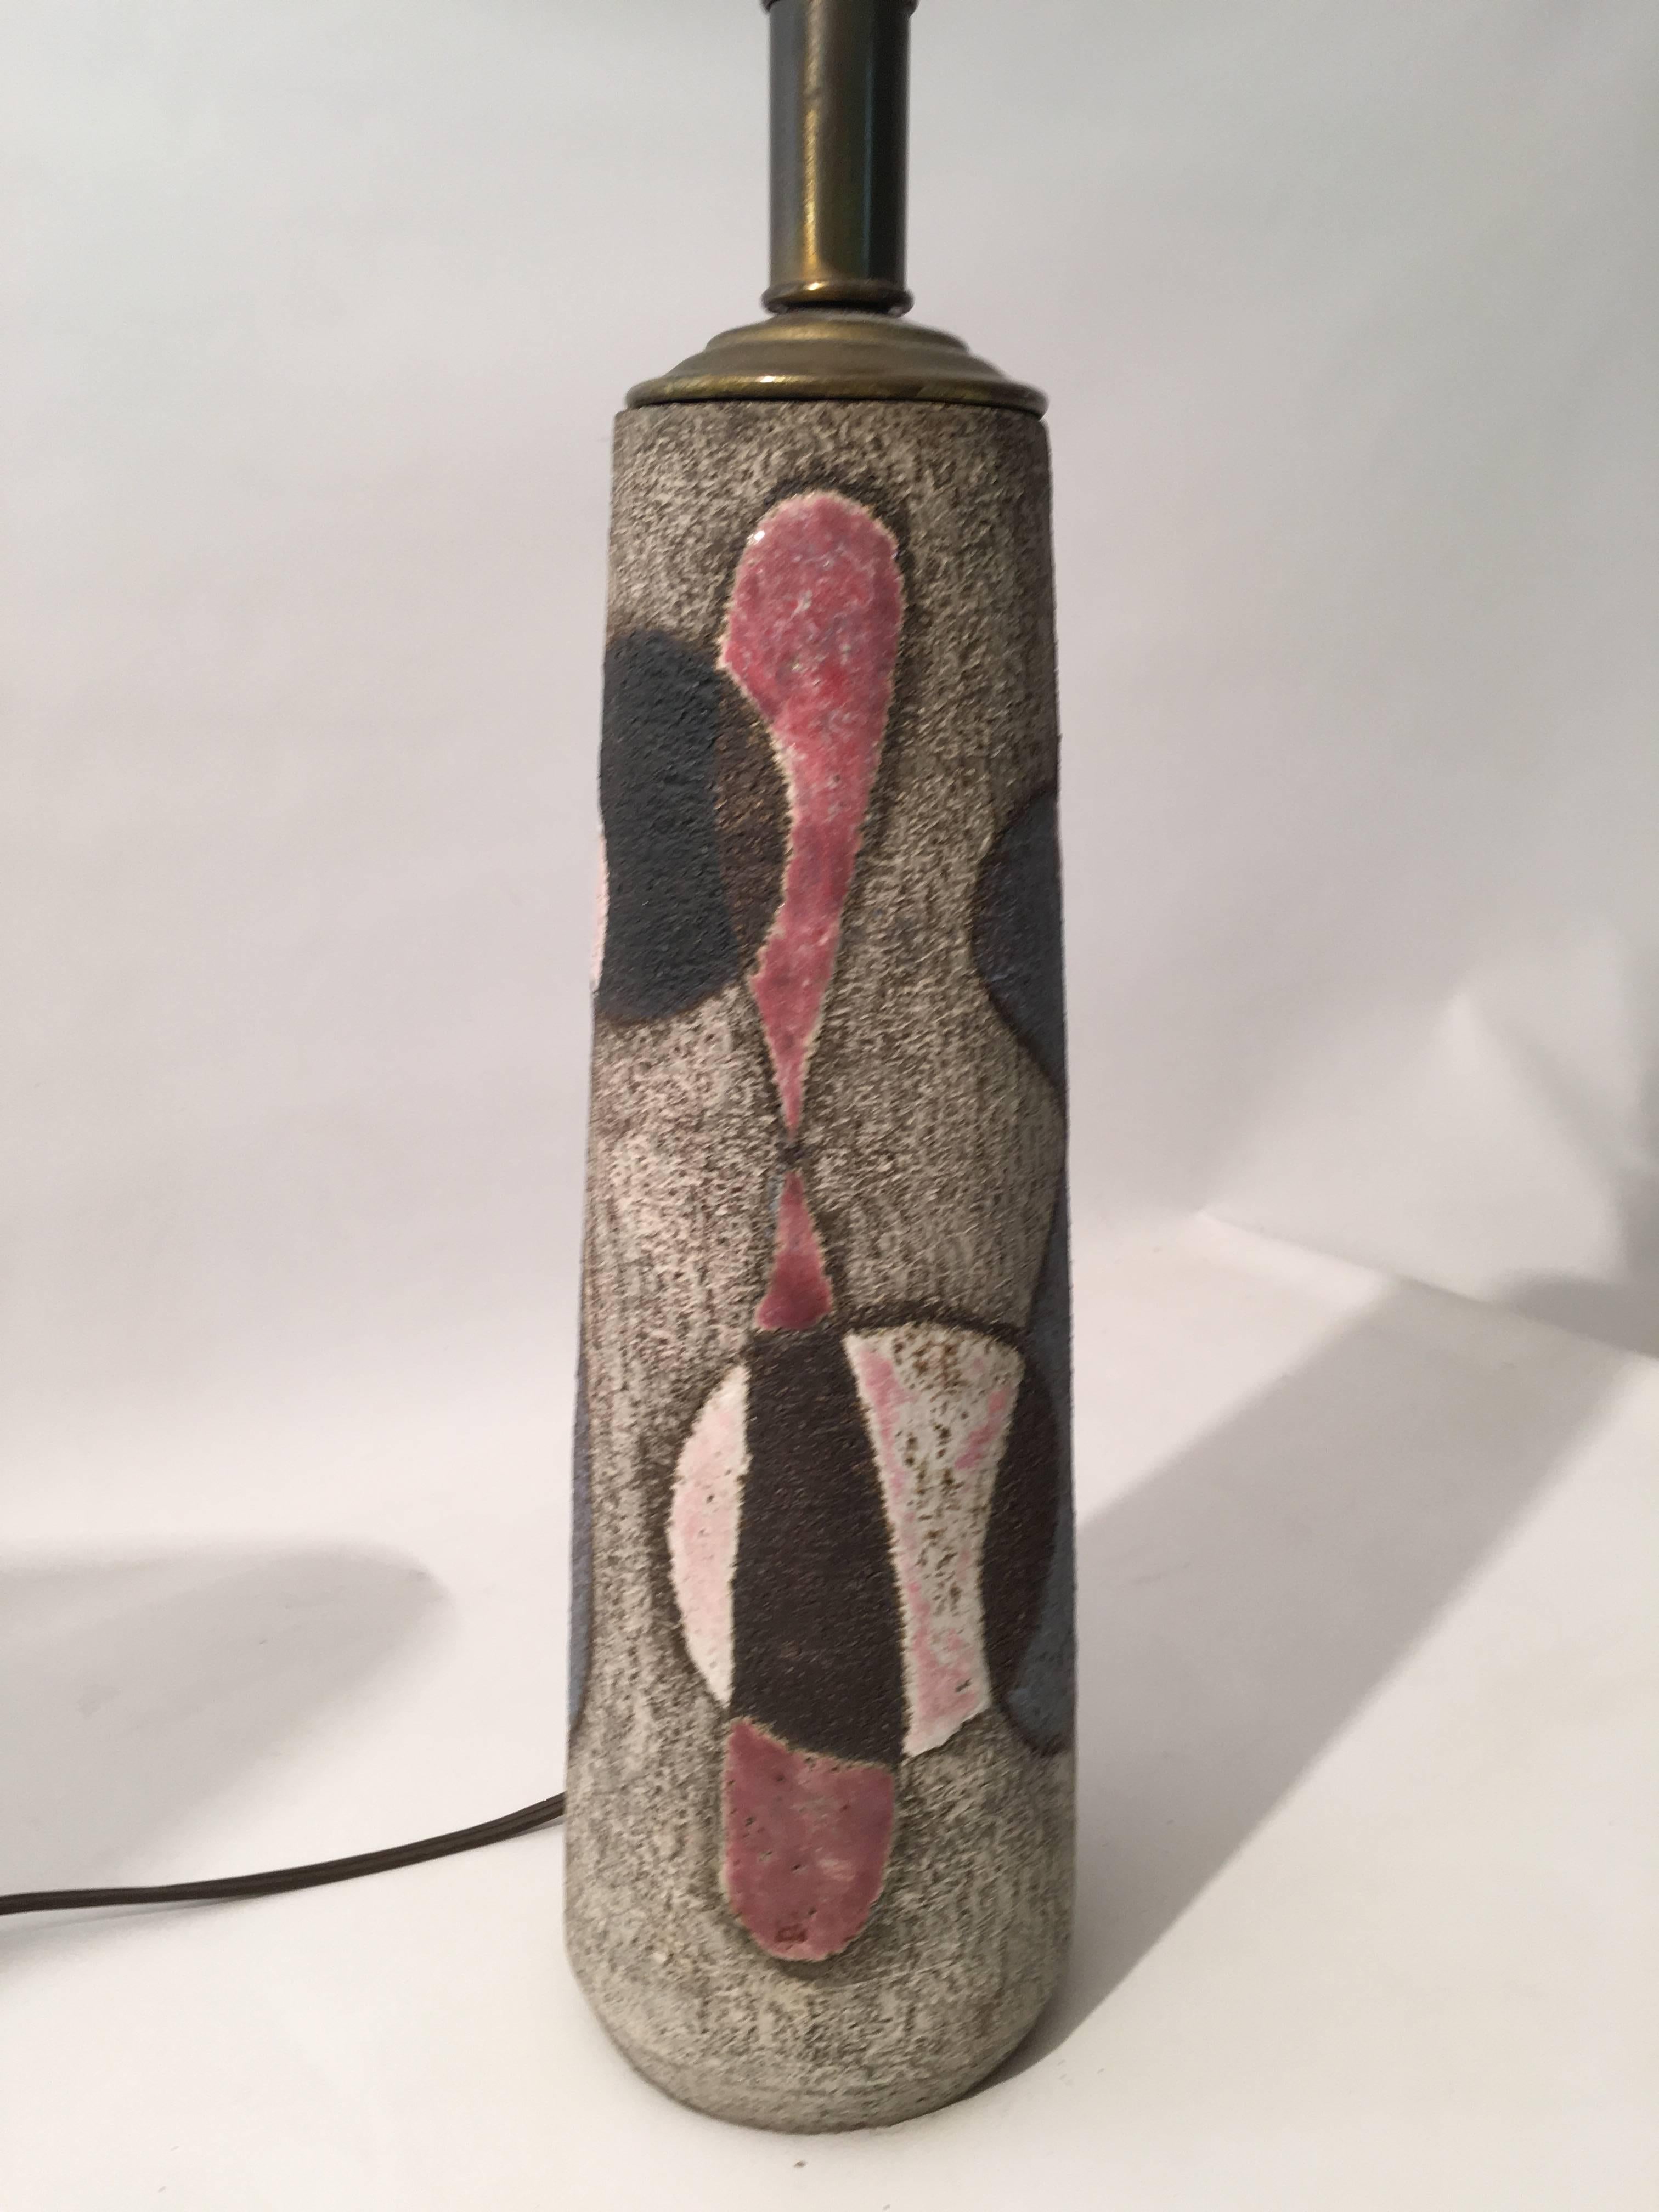 Beautiful abstract pattern pottery table lamp by Meidert Zaalberg. Dutch pottery that contrasted rough and smooth high glazed areas of color. The abstracted patterns of loops and circles are glazed in blue, red, black and white, circa 1960. The